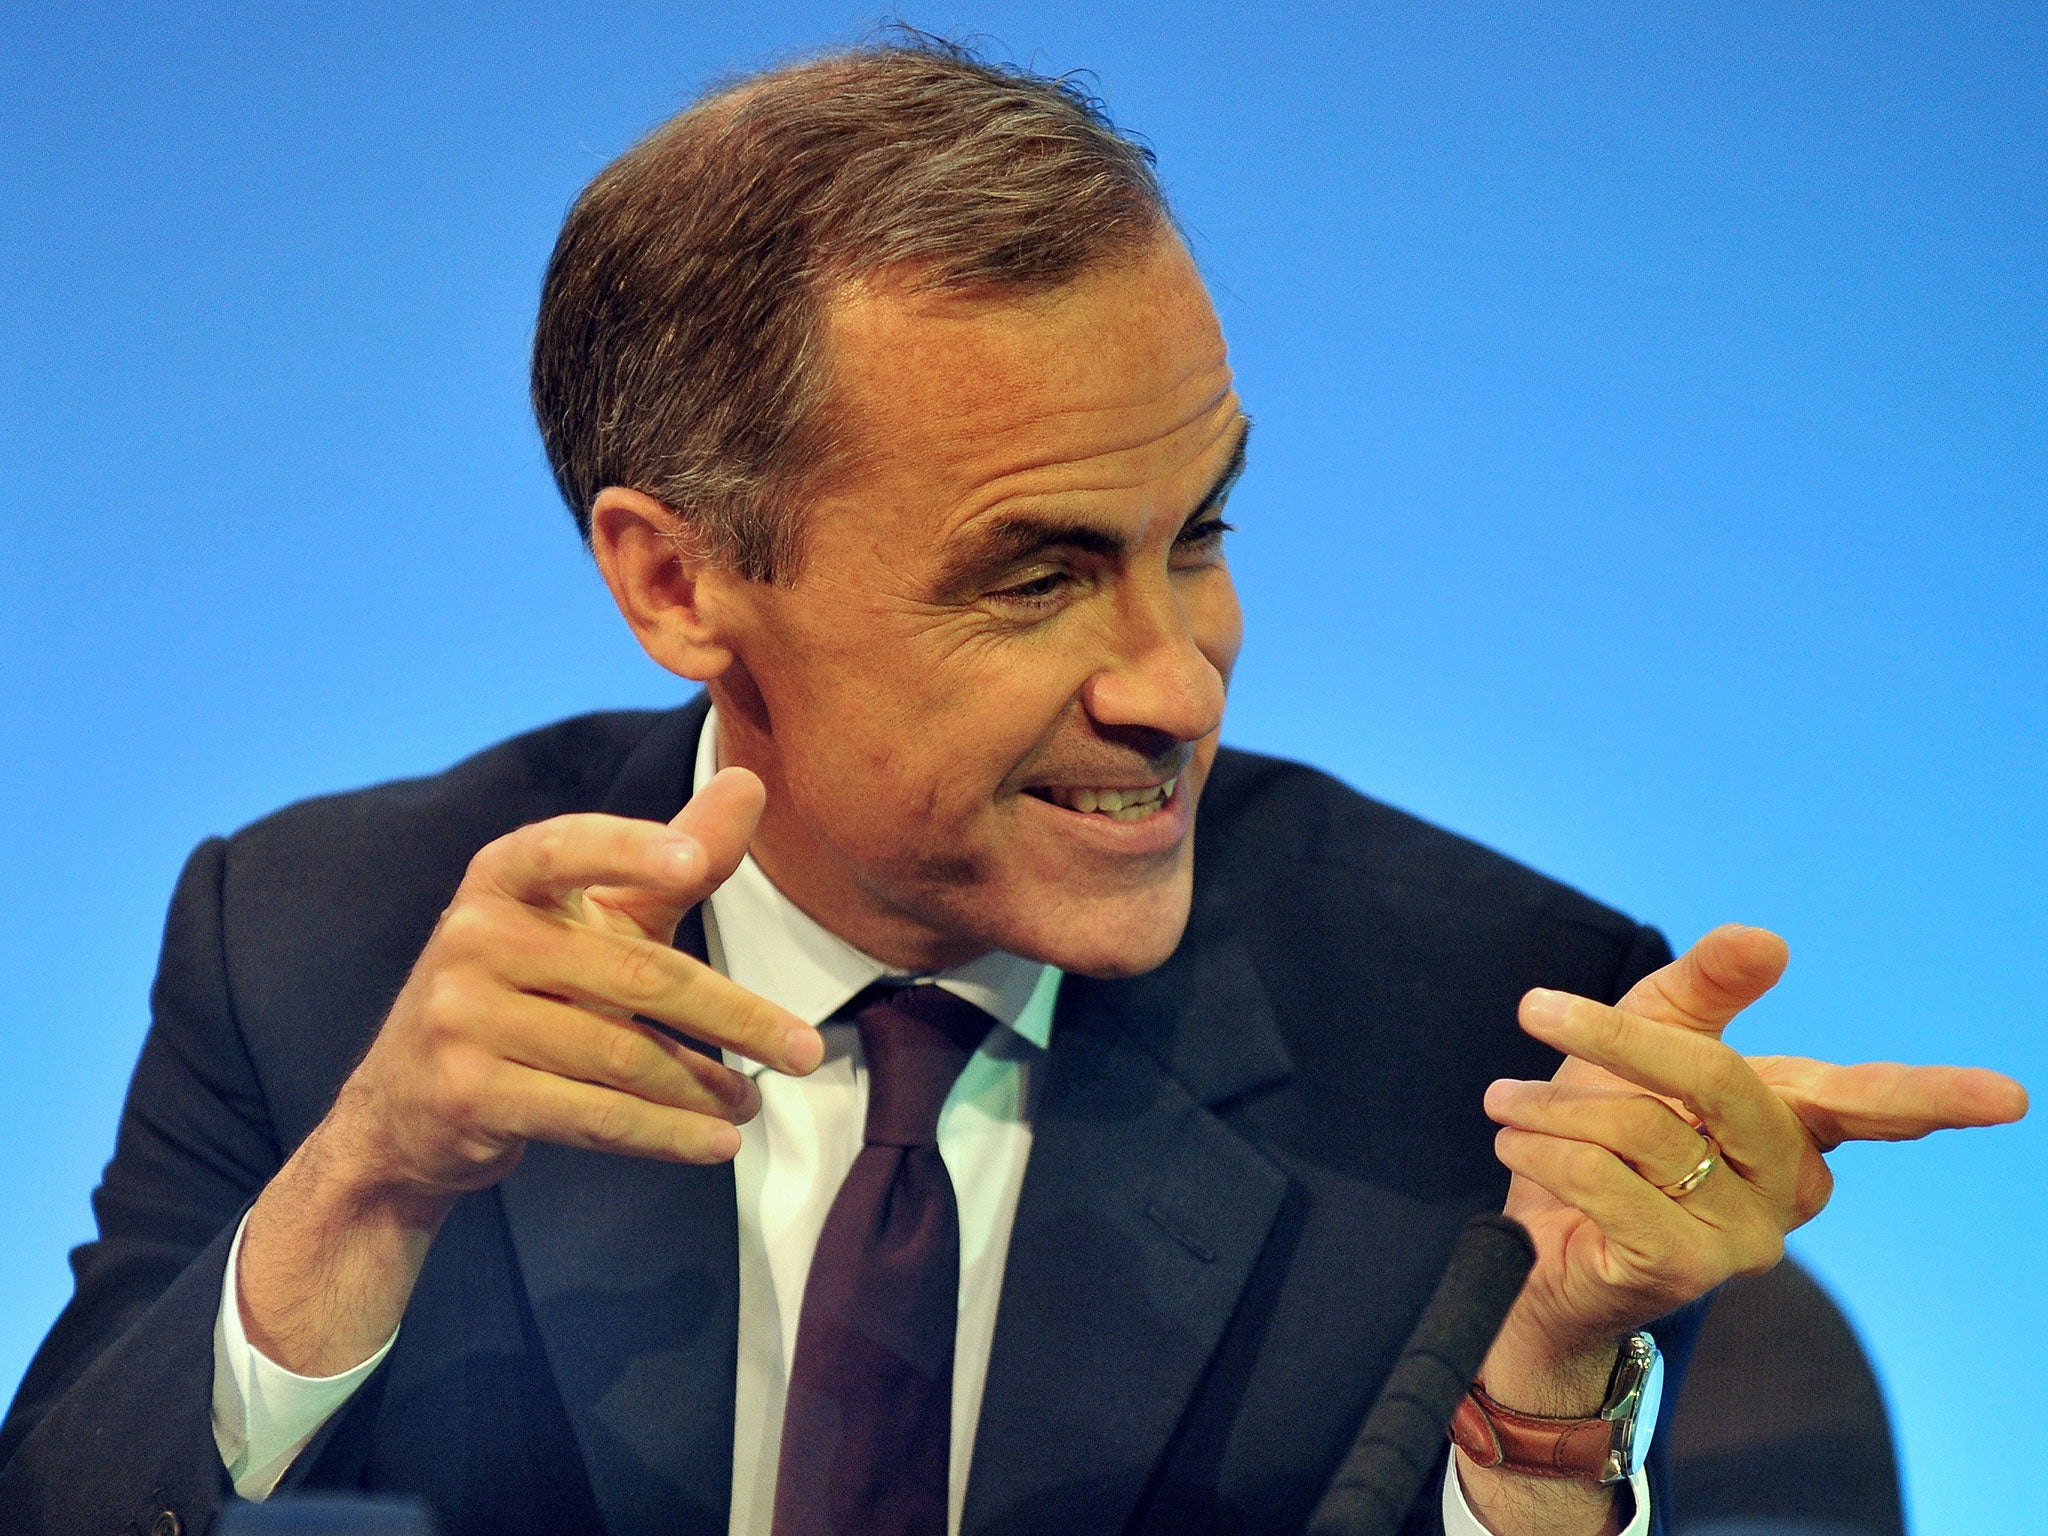 Bank of England governor Mark Carney answers questions after addressing the annual TUC Congress in Liverpool, northwest England, on September 9, 2014.